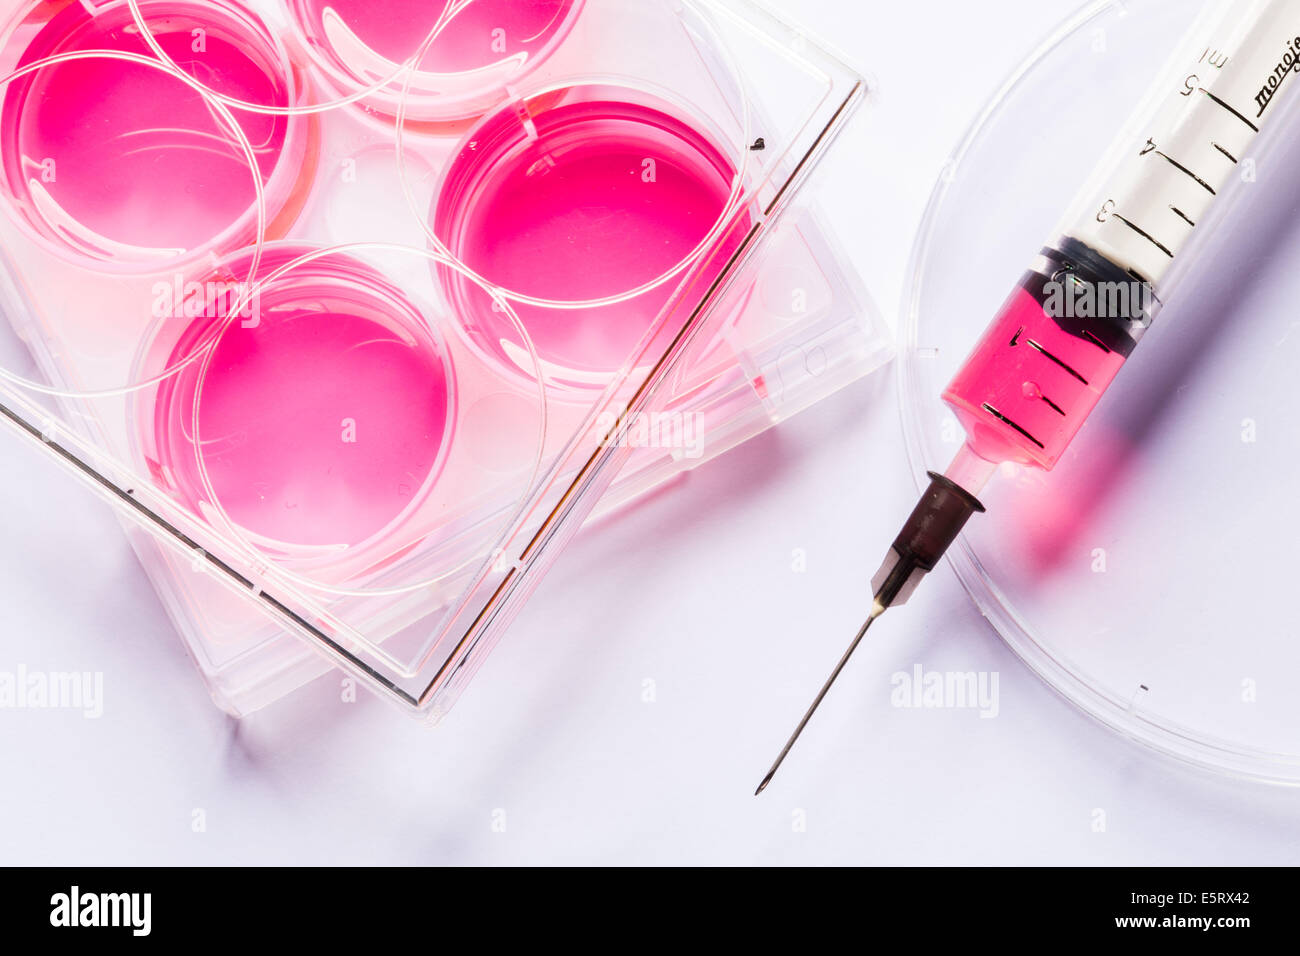 Stem cell research, Syringe and multiwell sample tray. Stock Photo